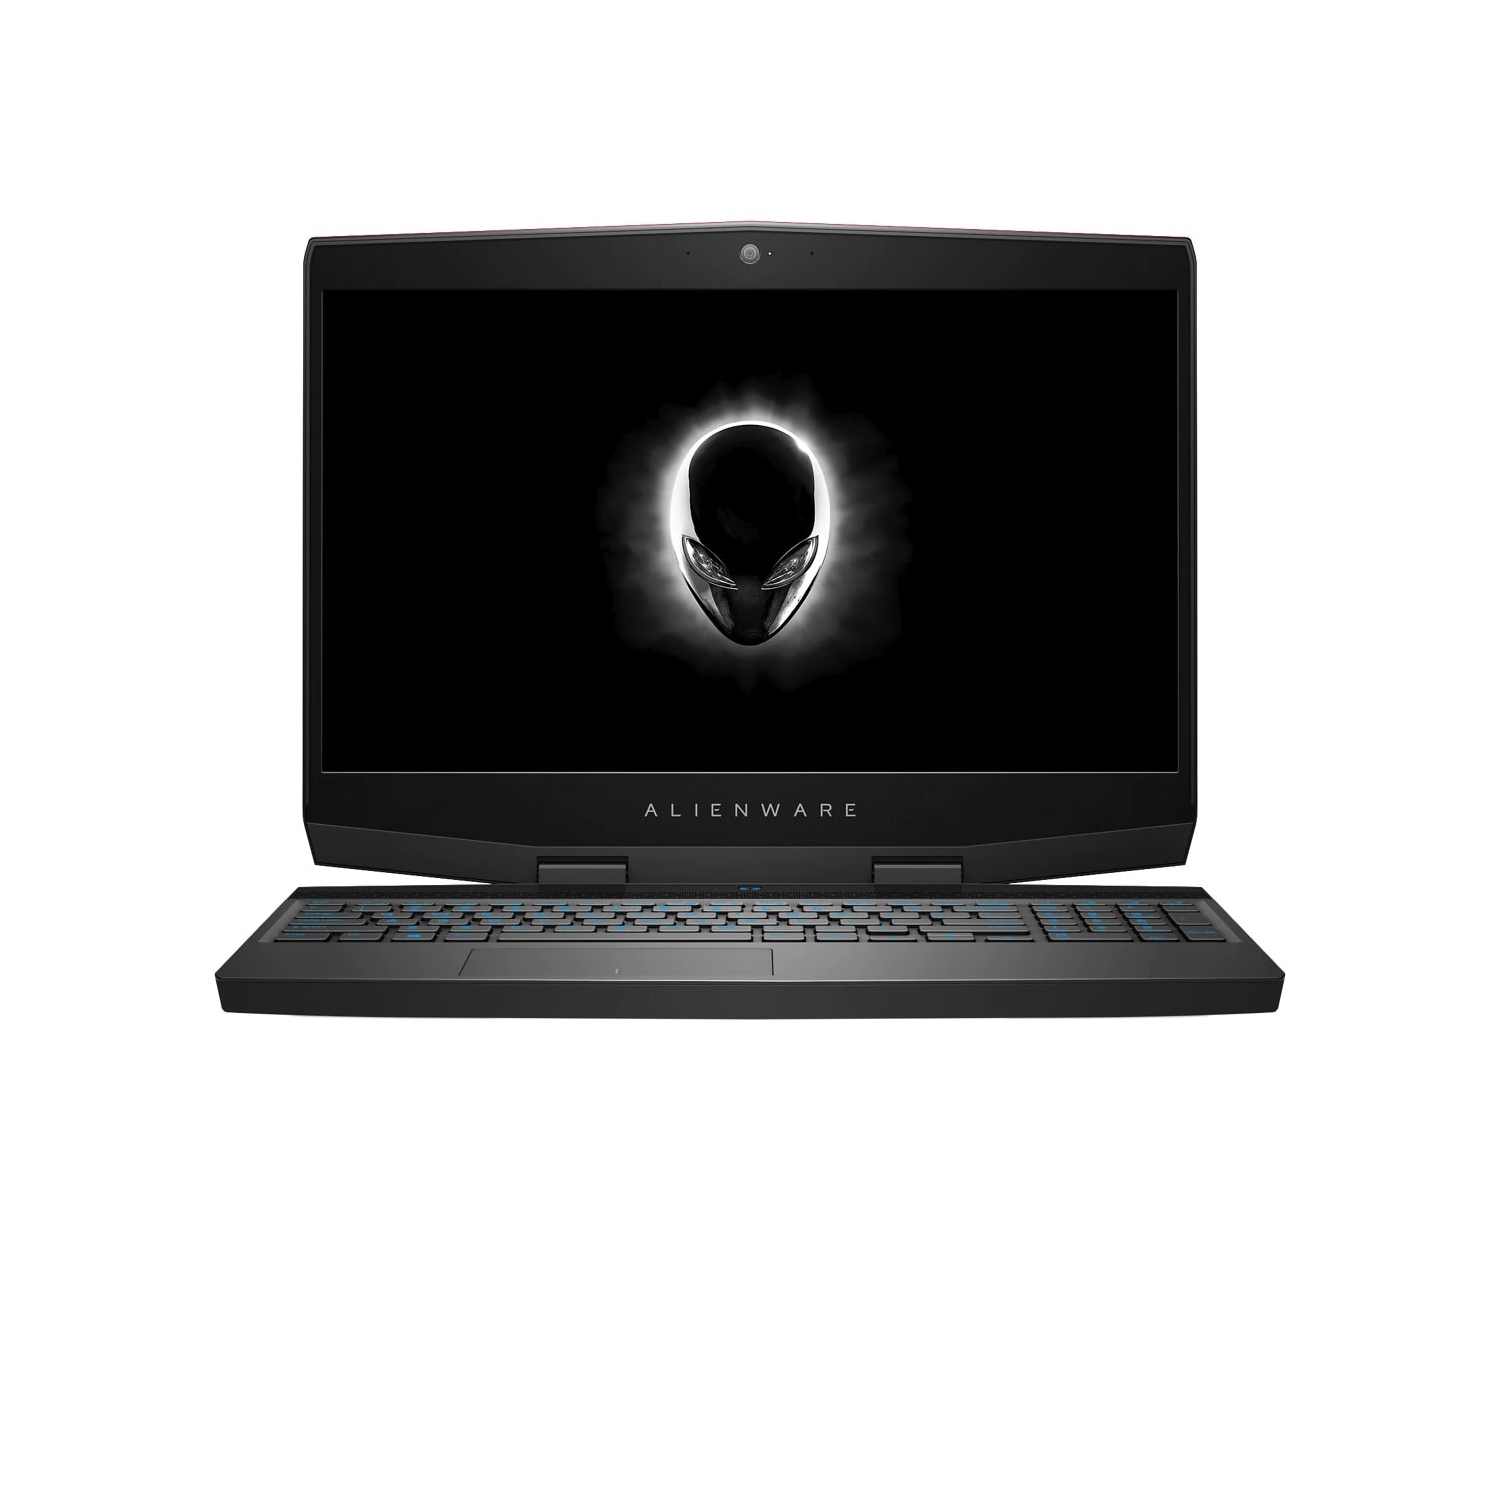 Refurbished (Excellent) - Dell Alienware m15 Gaming Laptop (2018), 15.6" FHD, Core i7, 256GB SSD + 256GB SSD, 32GB RAM, RTX 2070, 6 Cores @ 4.5 GHz Certified Refurbished